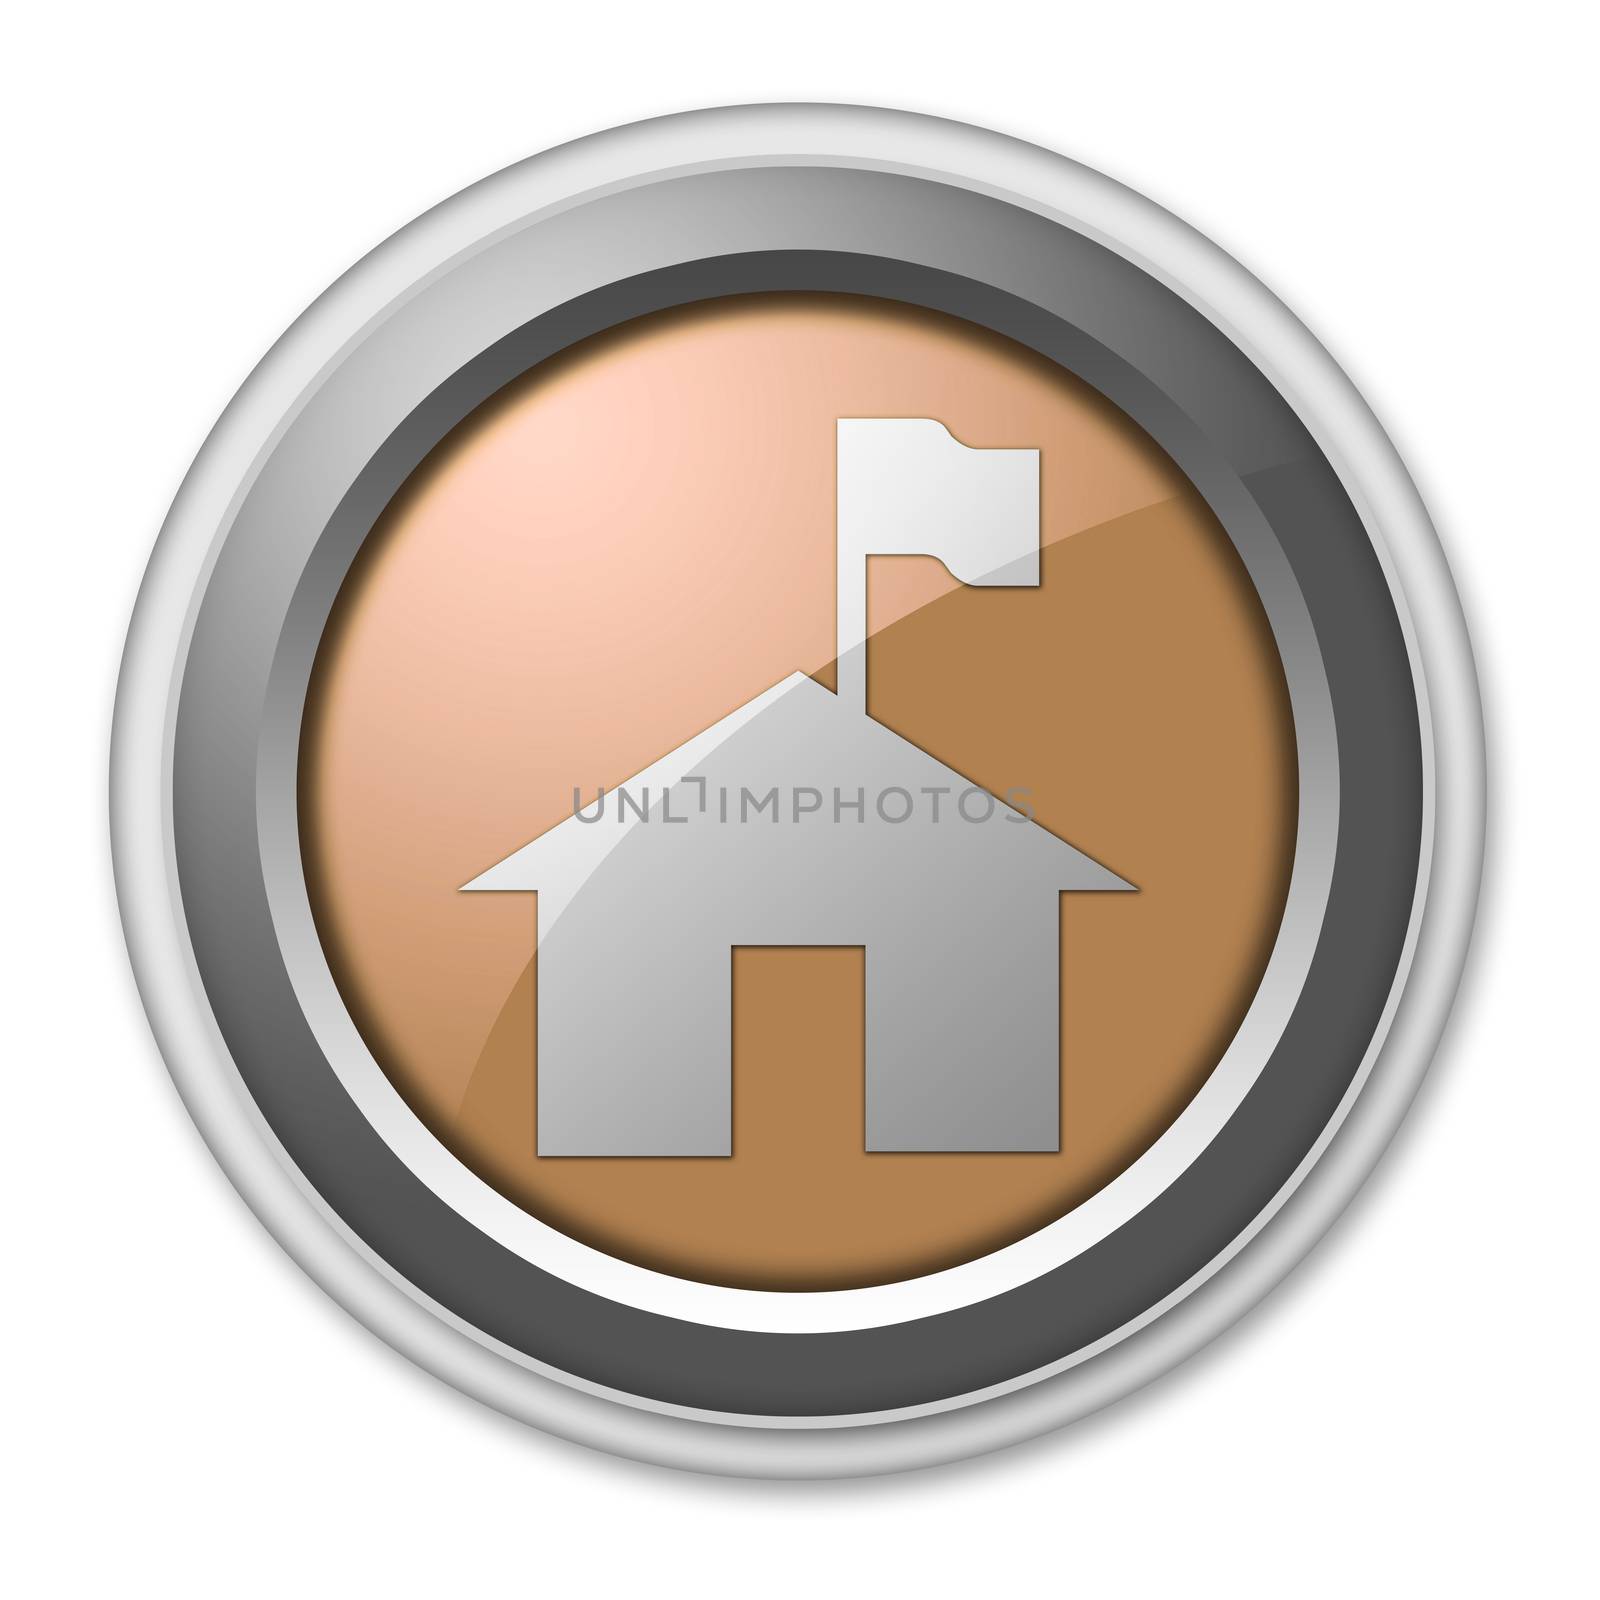 Icon, Button, Pictogram with Ranger Station symbol